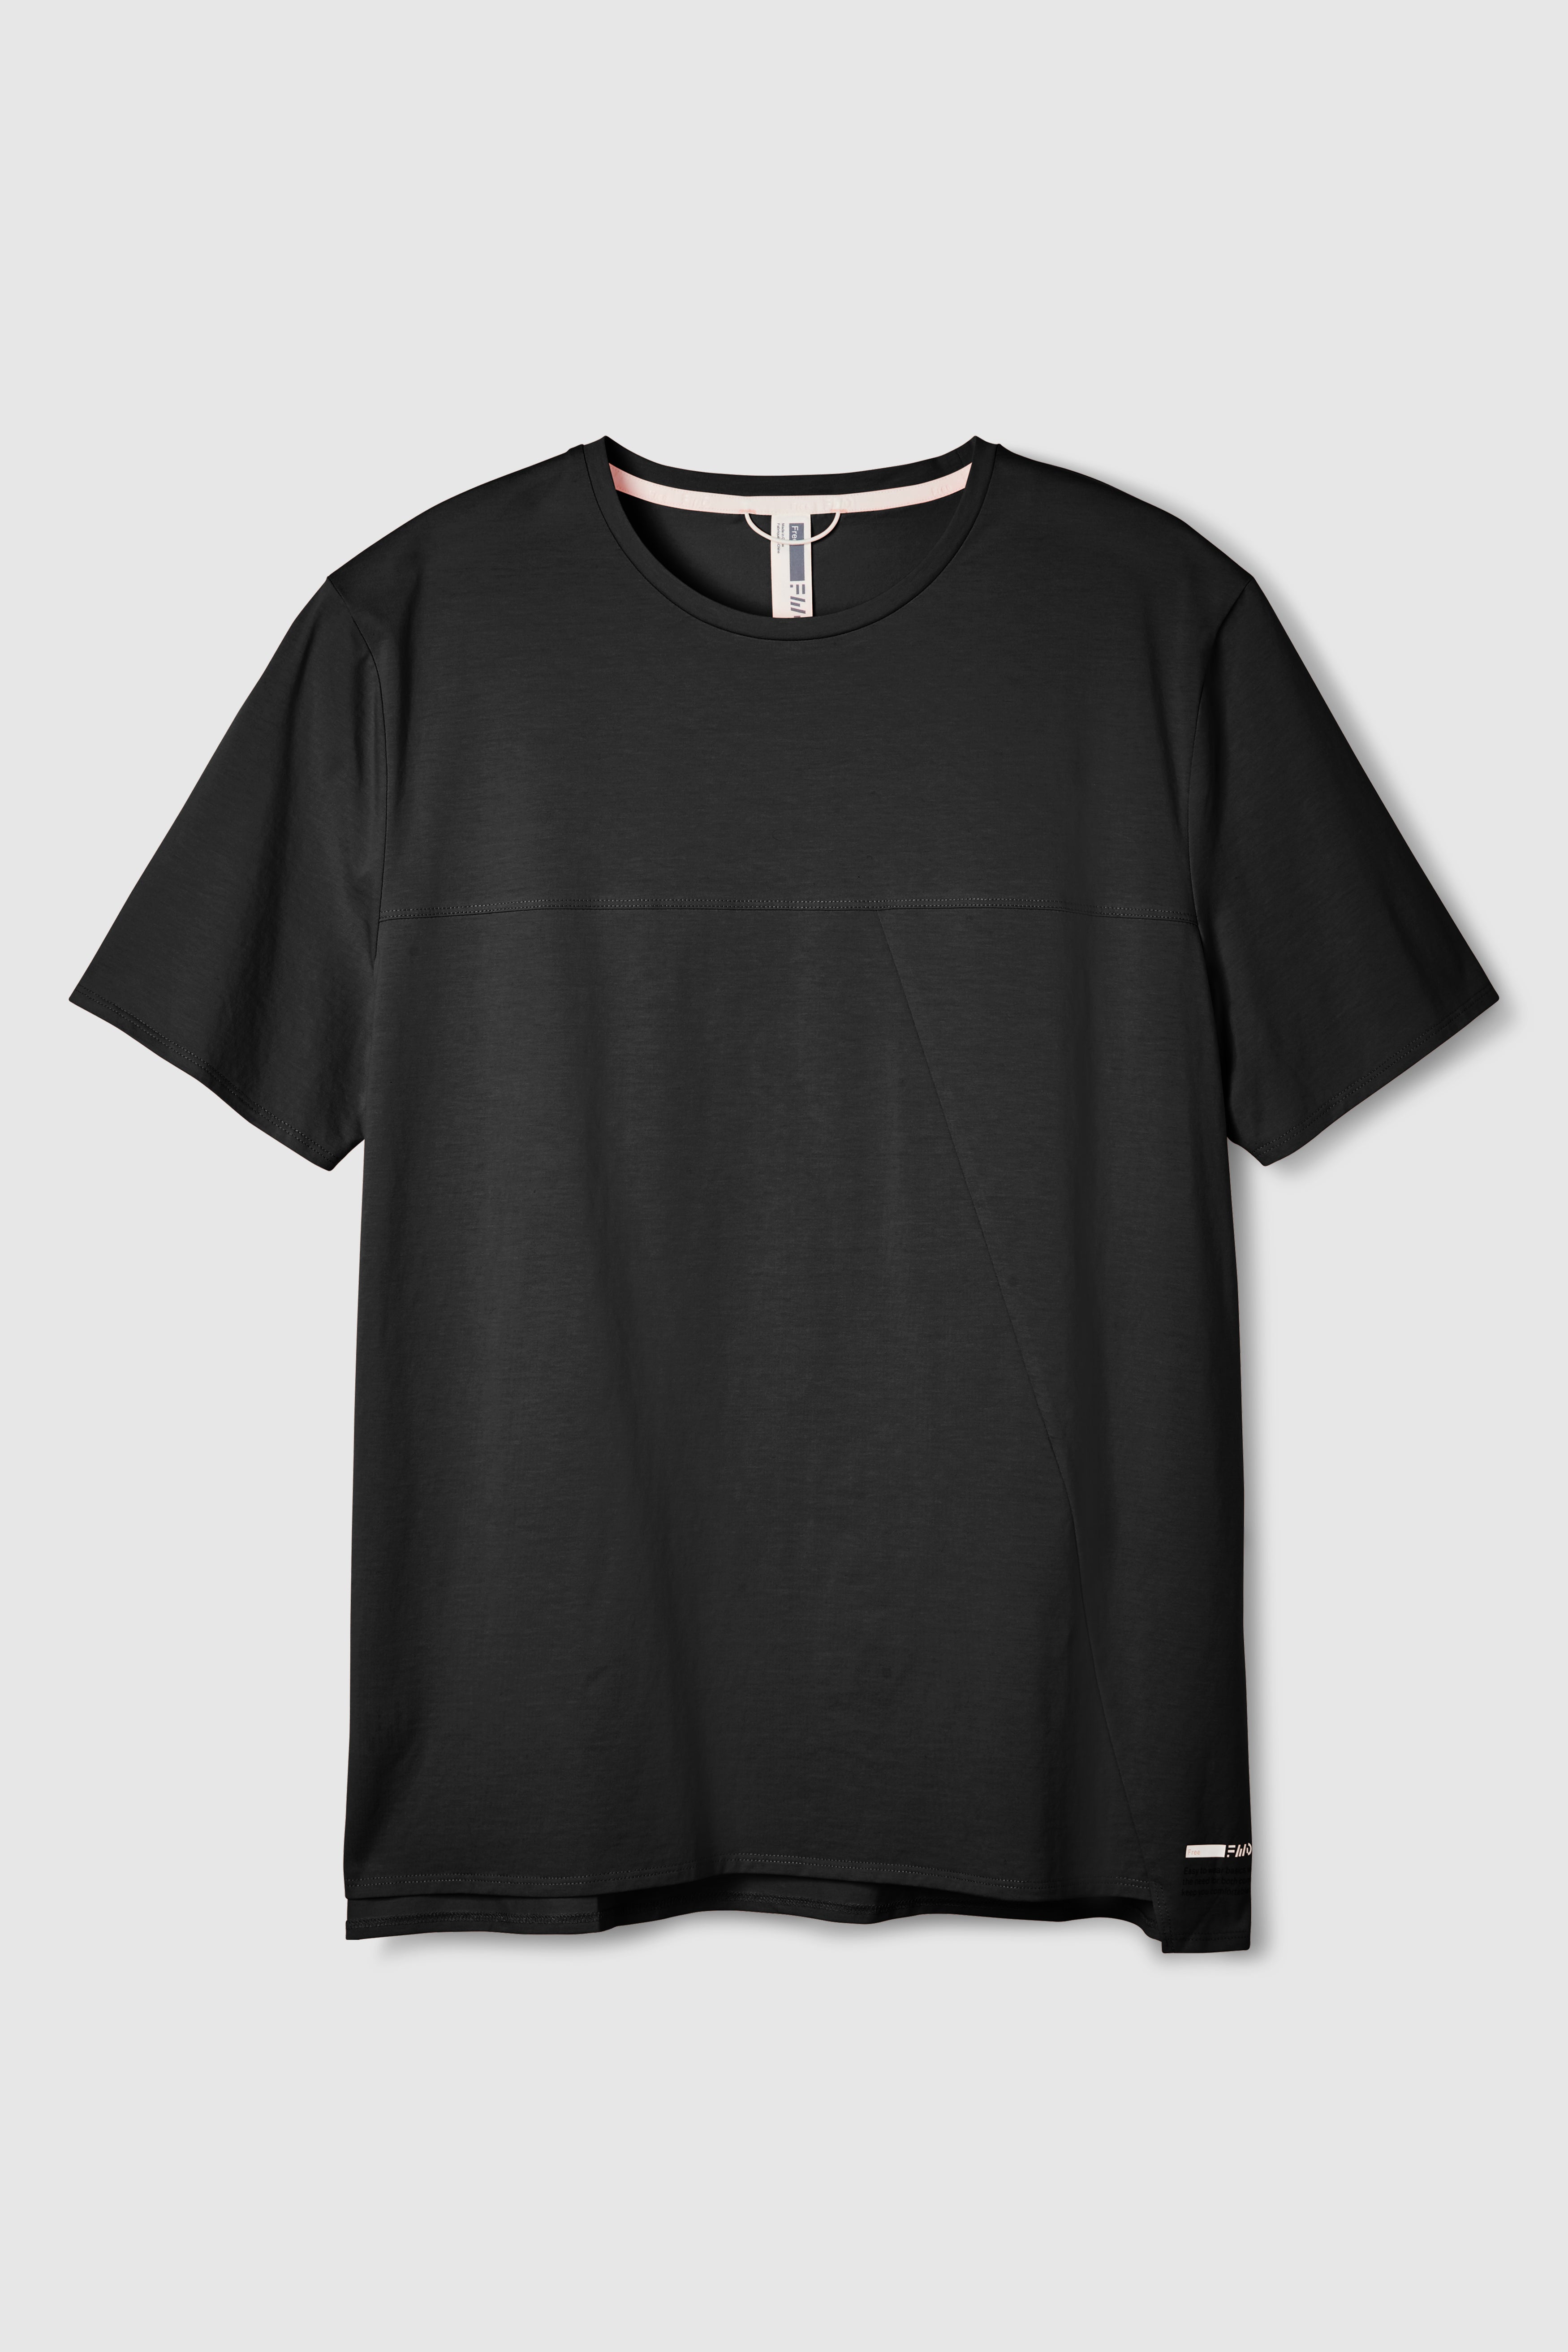 Free FWD Men's Pima Offset SS Tee - BEST SELLING